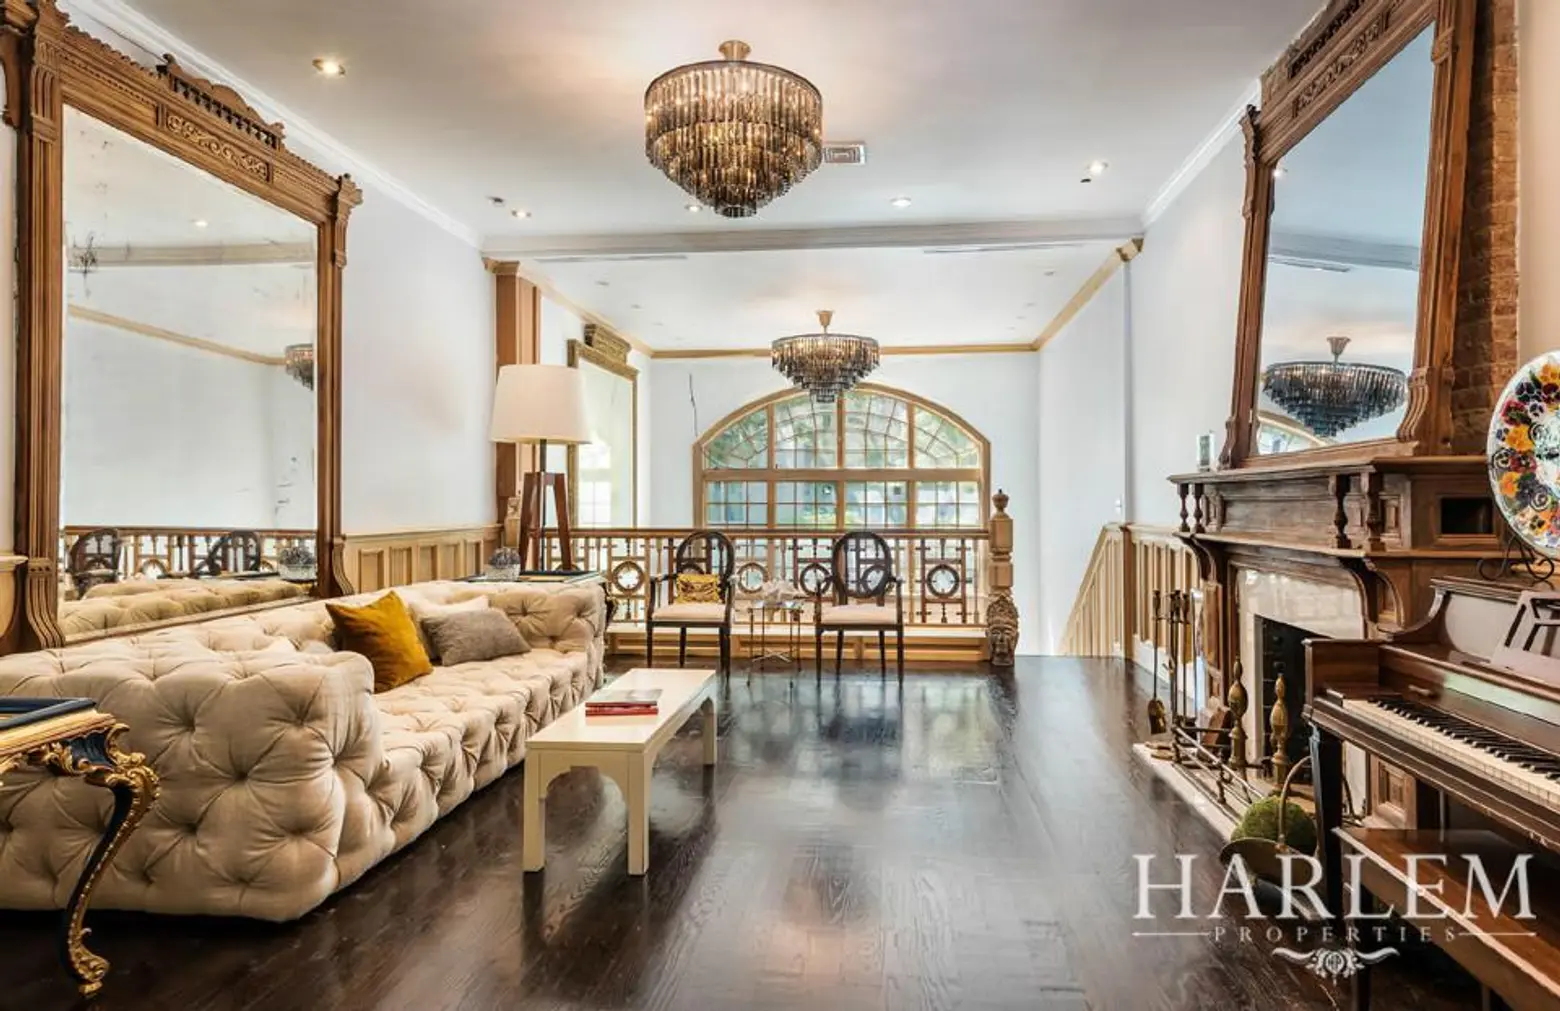 $3.65M lavish Harlem townhouse is full of marble, mirrors, and chandeliers